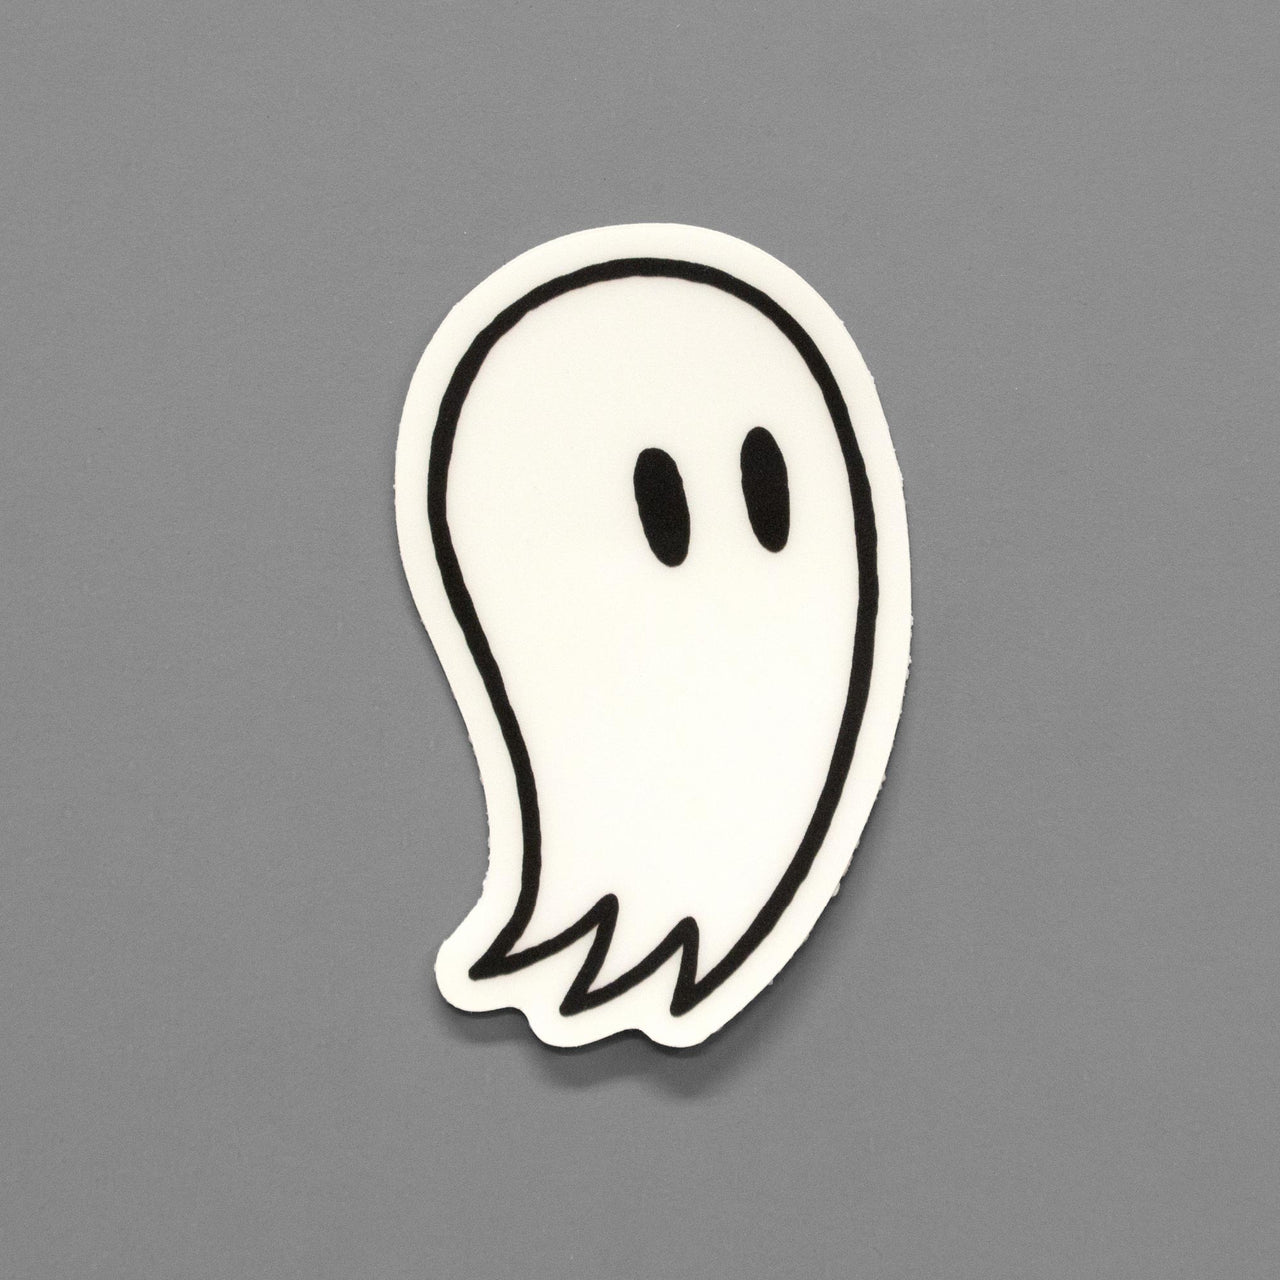 Fred the Ghost Glow-in-the-Dark Sticker